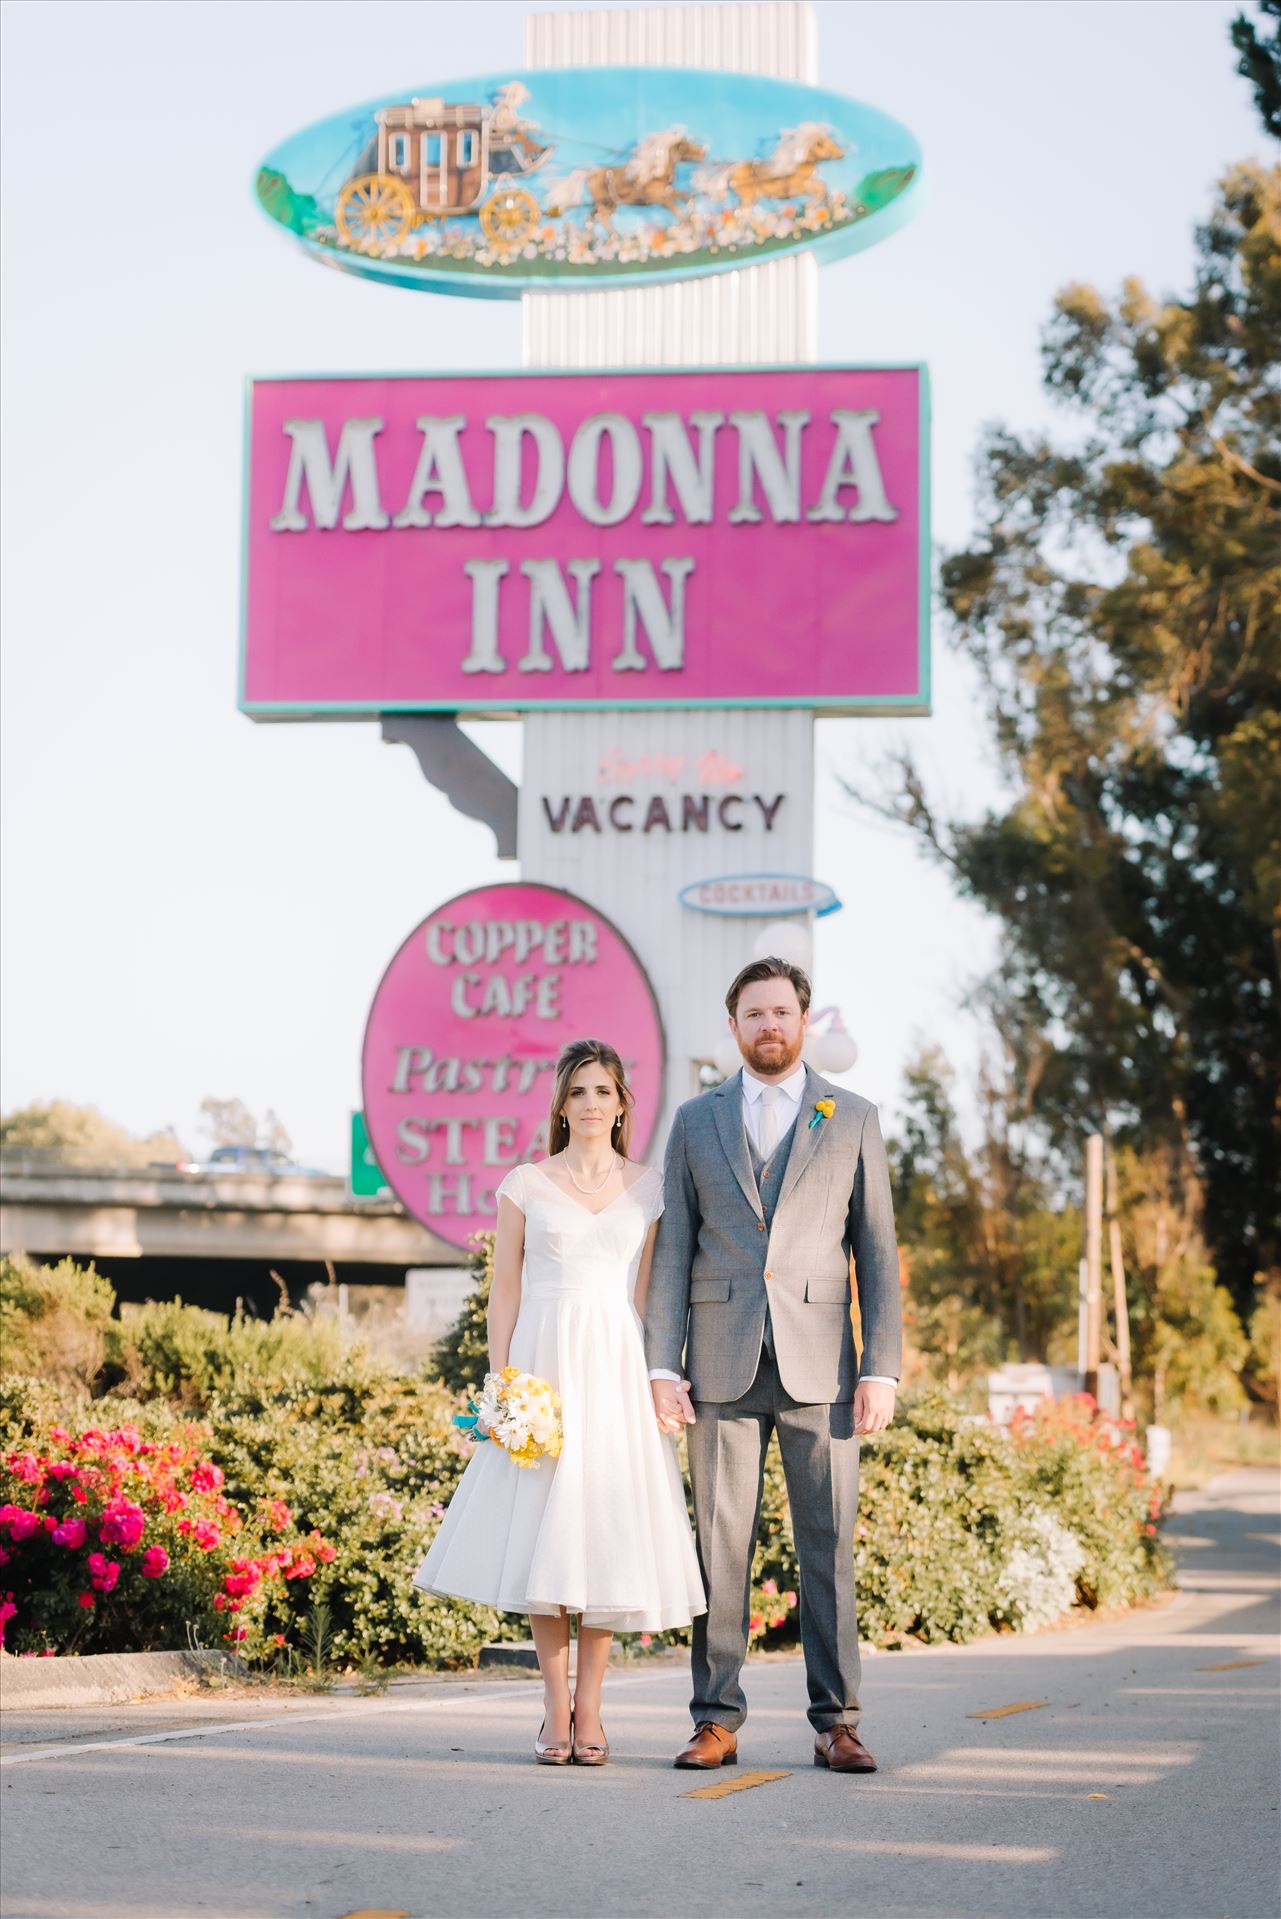 DSC_4274.JPG - Mirror's Edge Photography captures Sarah and David's magical Madonna Inn Wedding in San Luis Obispo, California. Bride and Groom vintage vibe in front of Madonna Inn Sign. by Sarah Williams